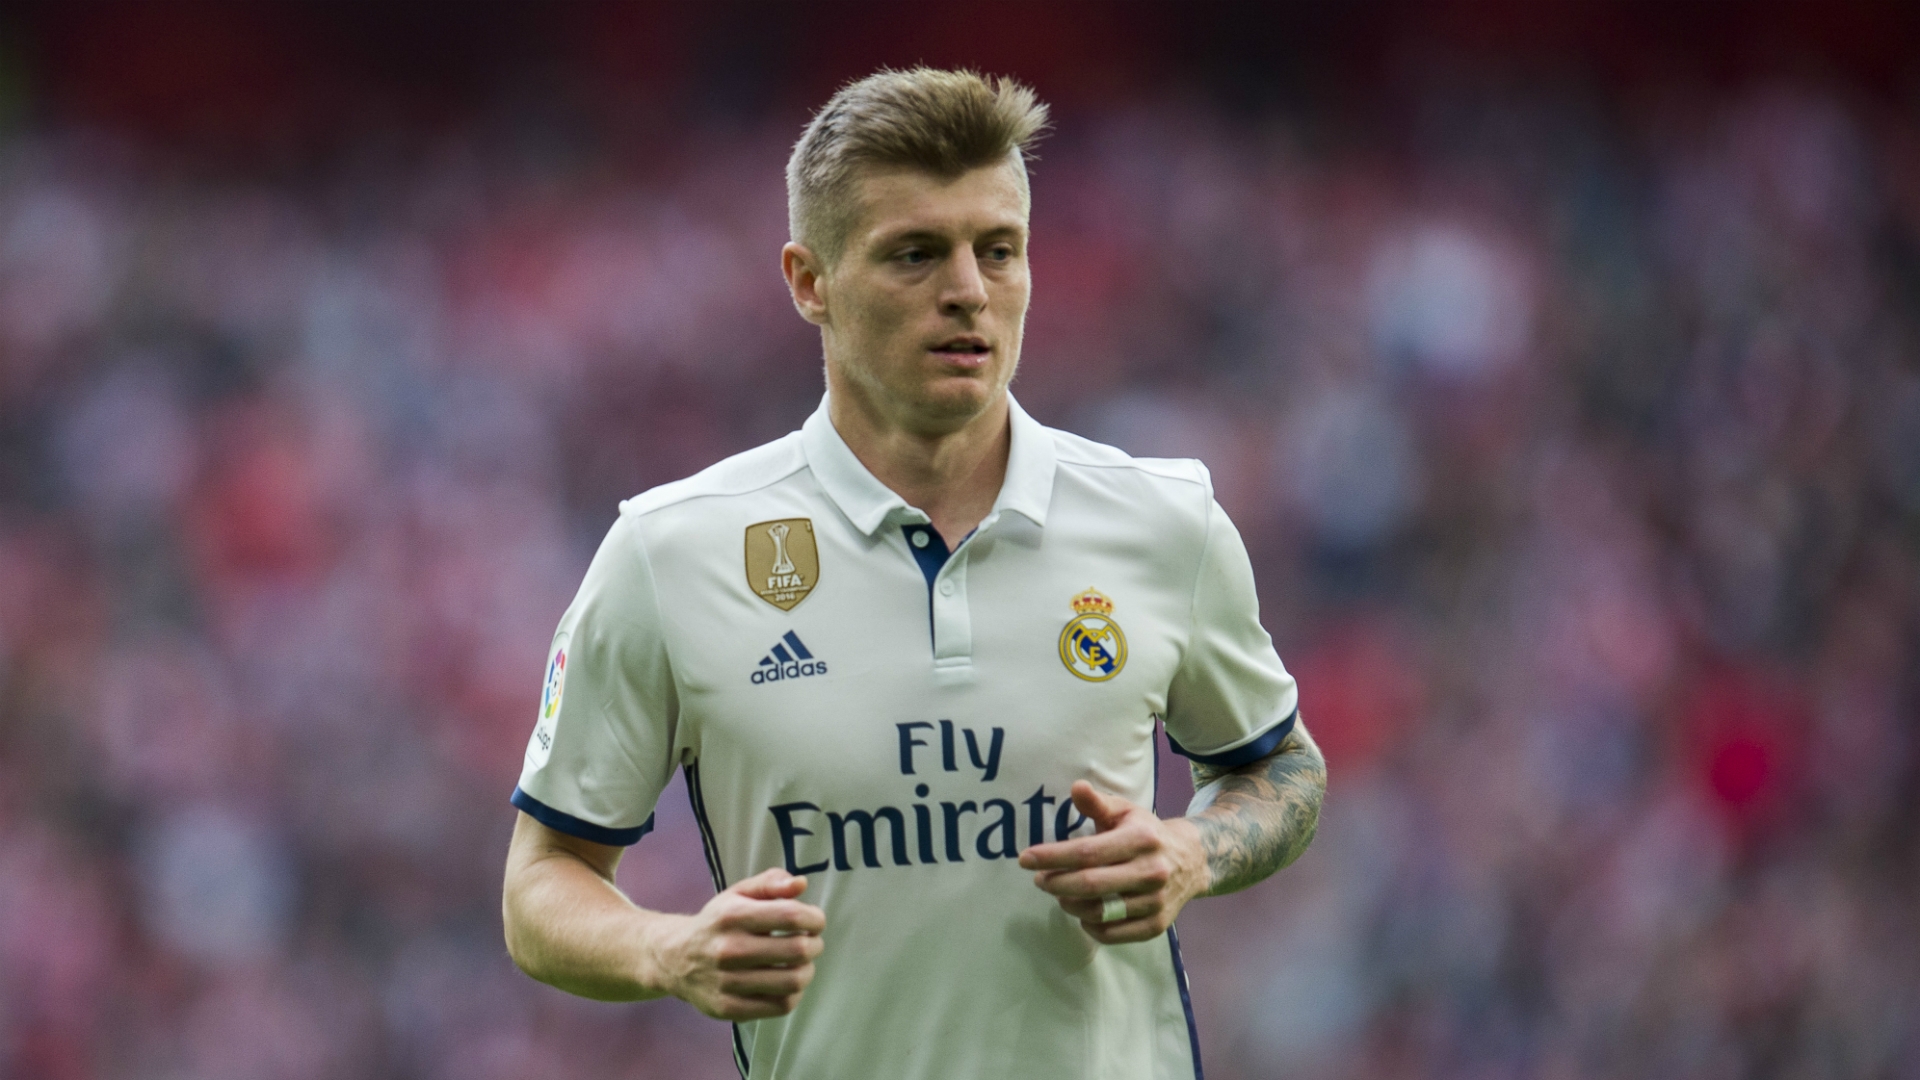 Toni Kroos is expected to play in the Champions League final between Real and Juventus on Saturday